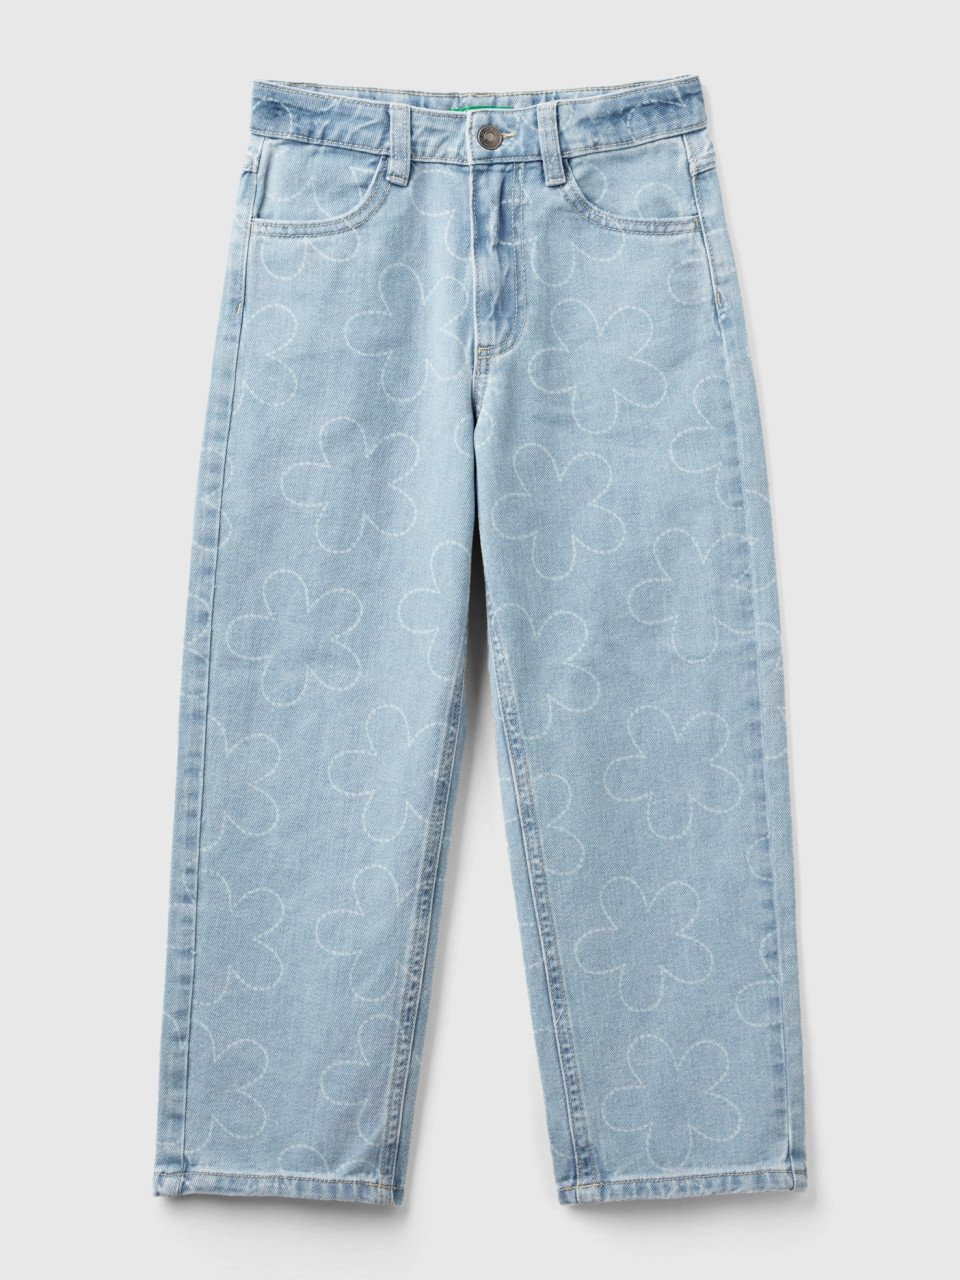 Benetton, Straight Fit Jeans With Flowers, Sky Blue, Kids